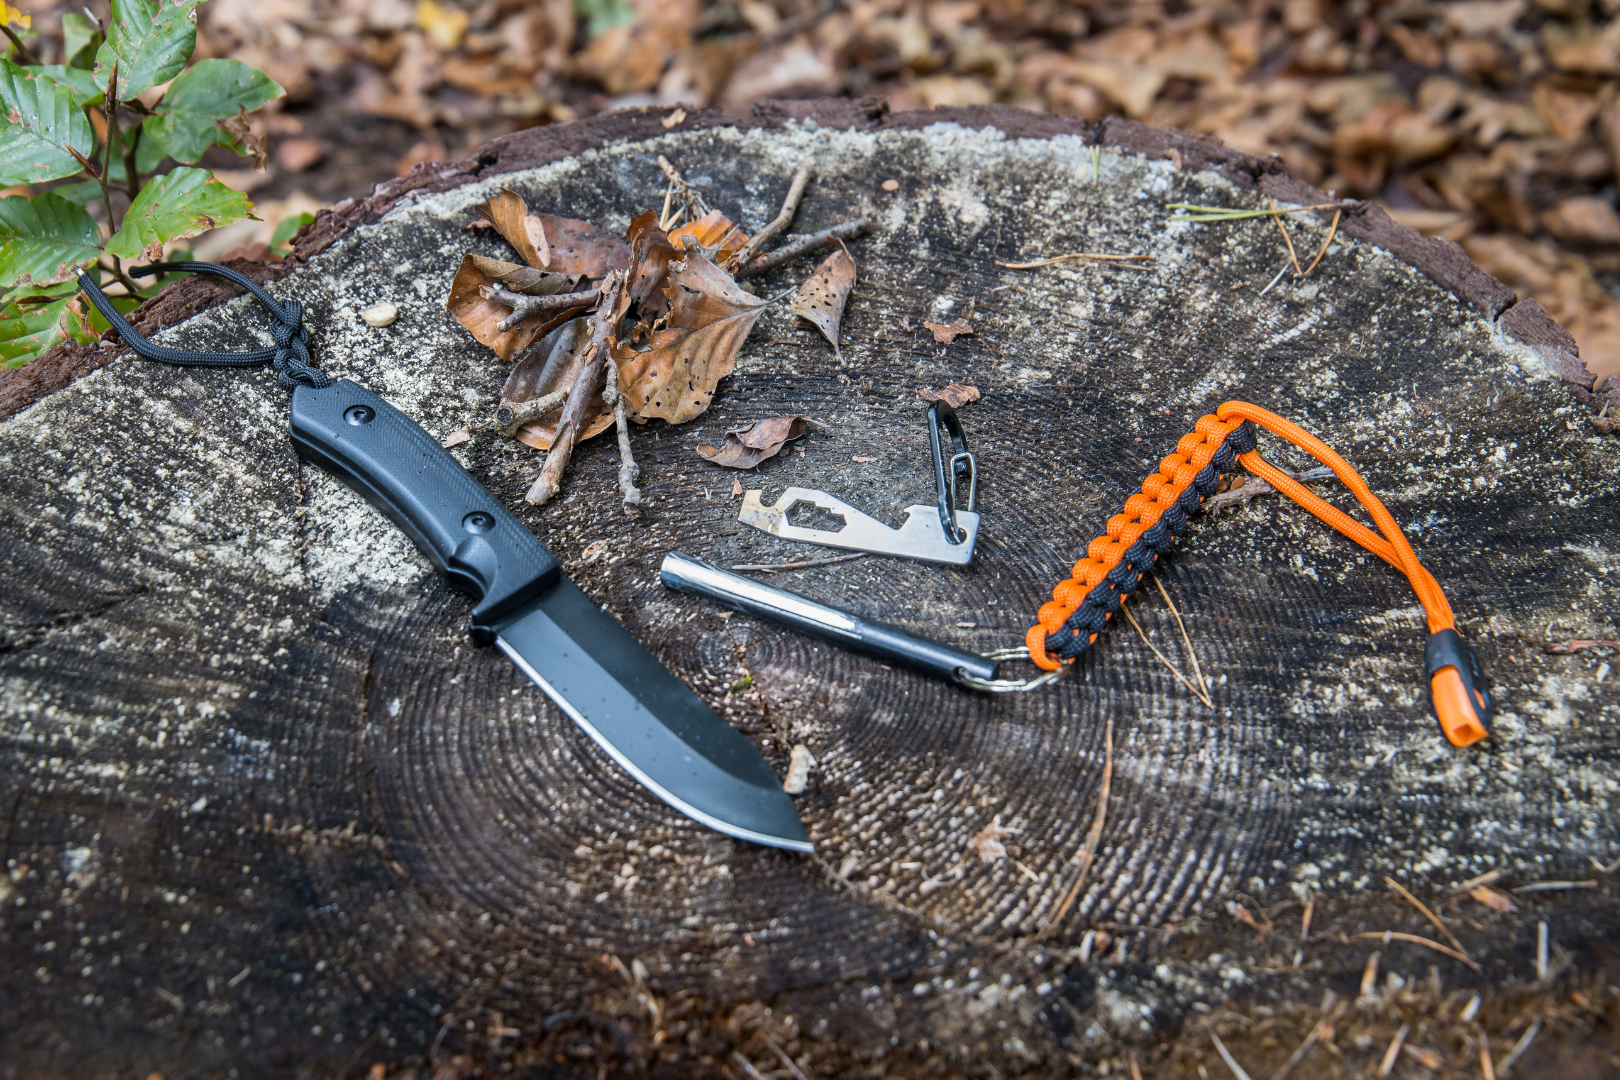 bushcraft tools include knife and multitool